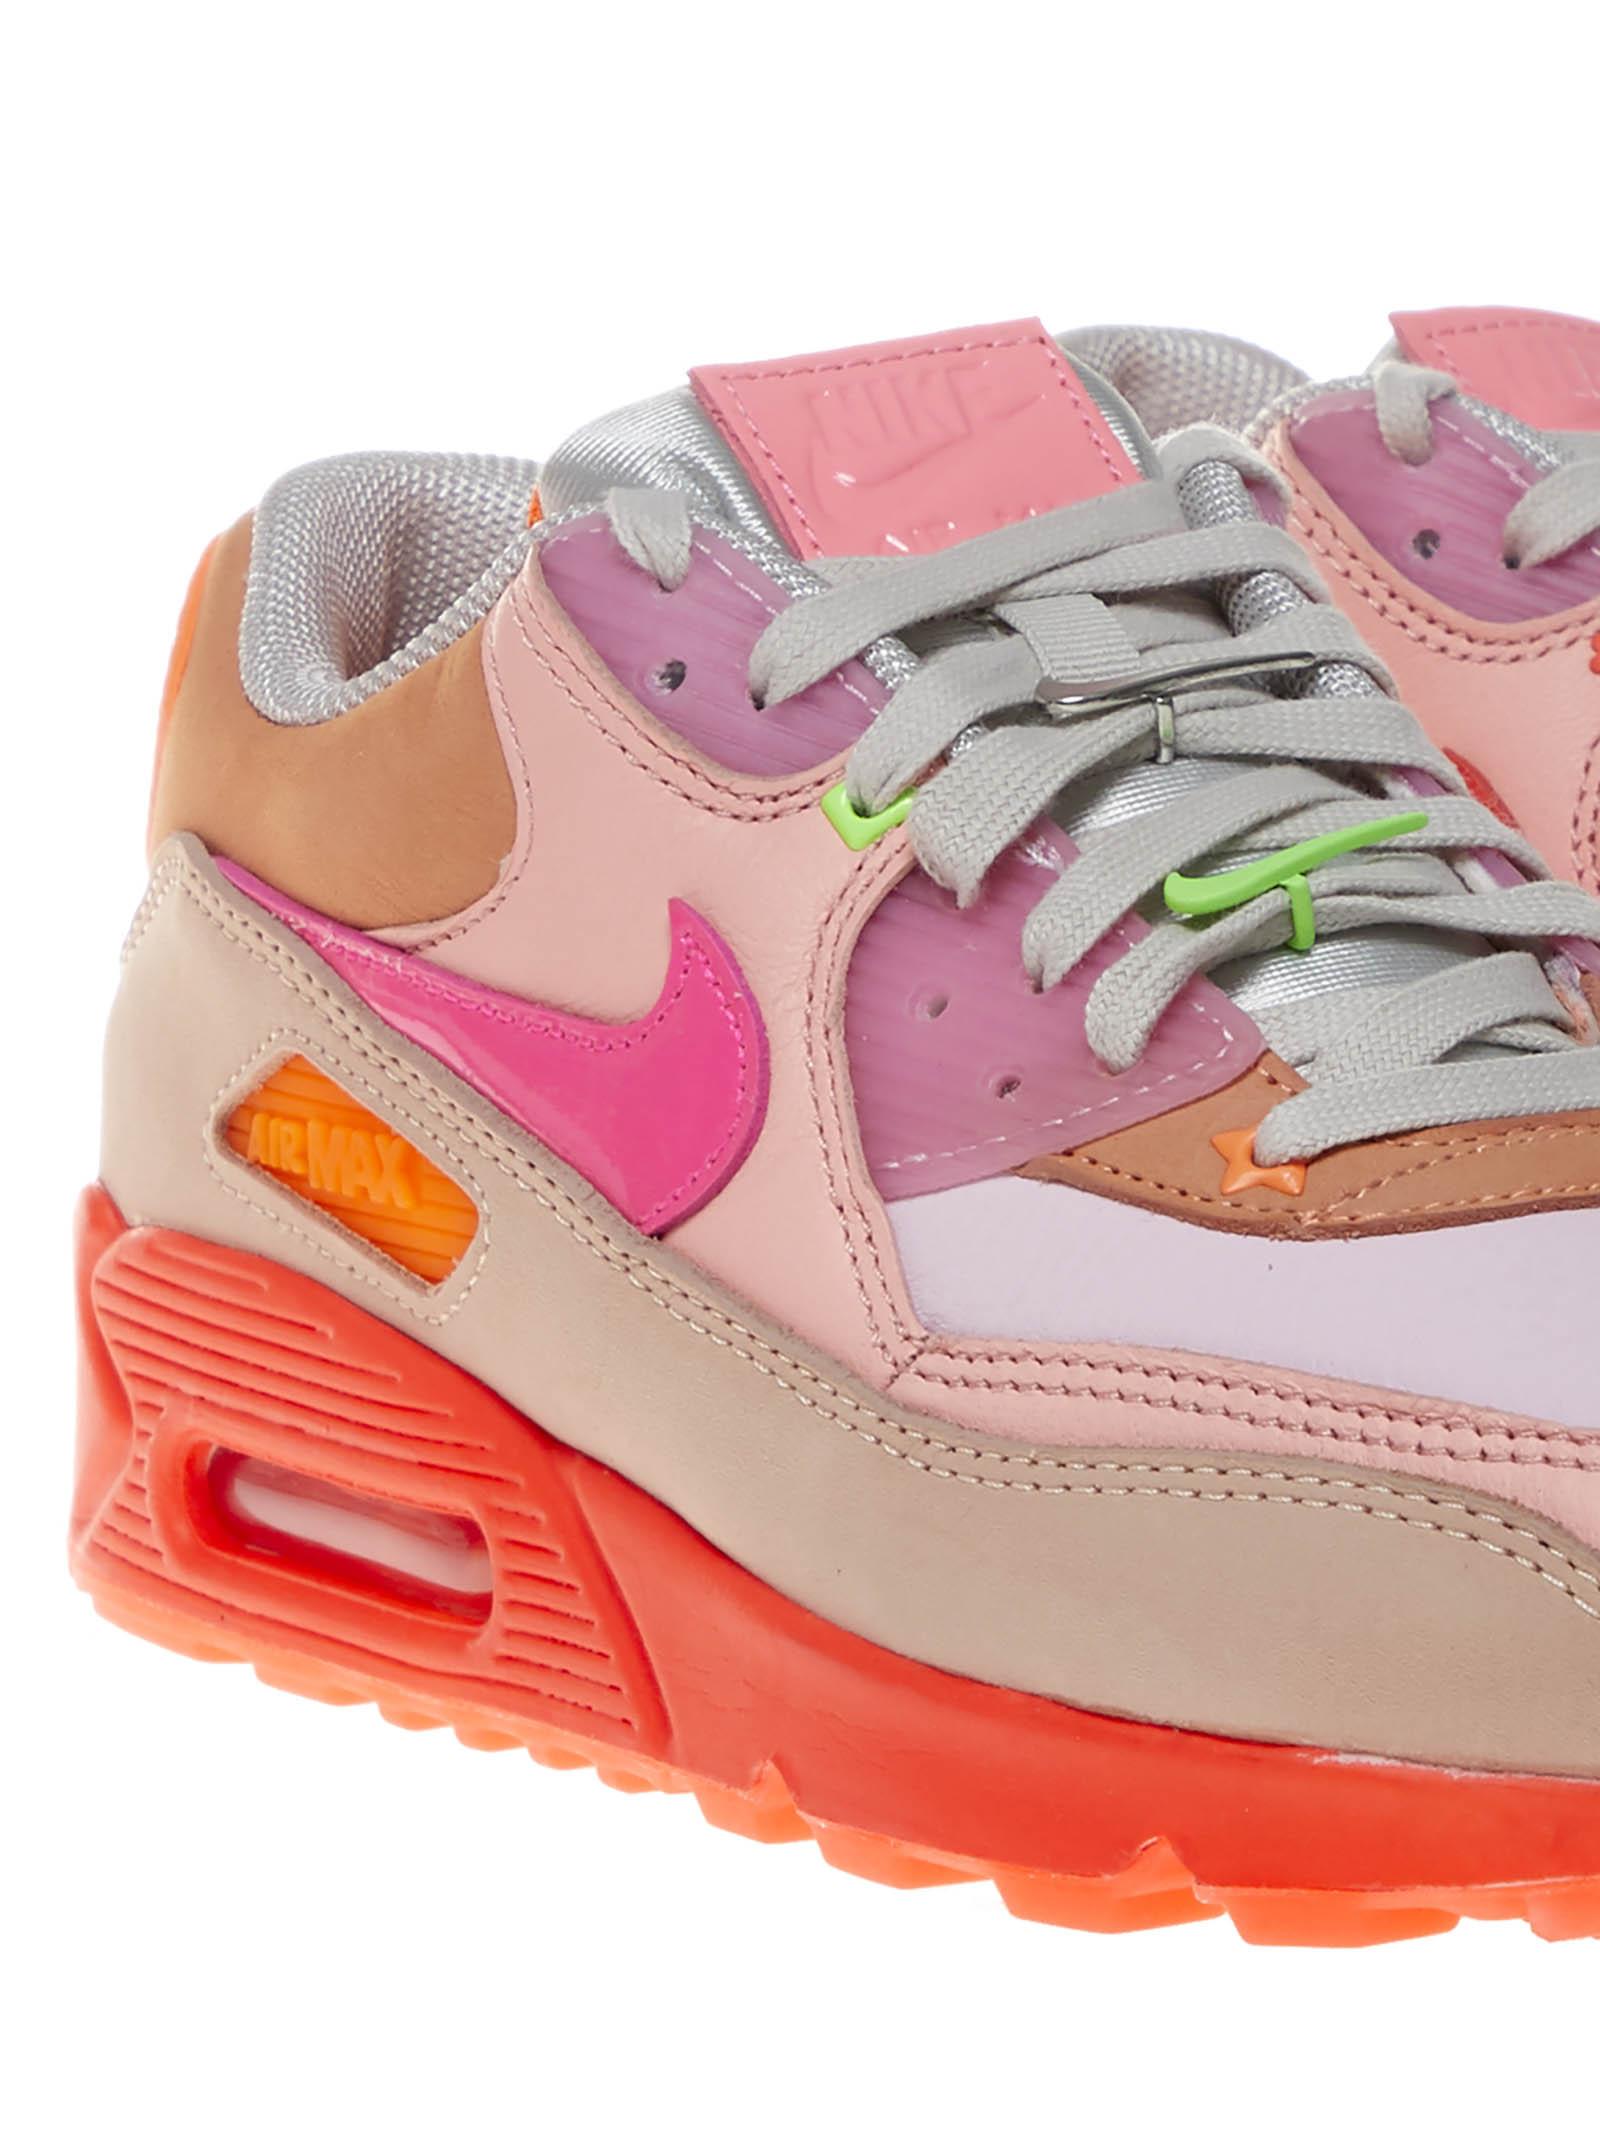 Nike Leather Pink And Orange Air Max 90 Sneakers With Layered Design And  Integrated Air Technology. | Lyst UK